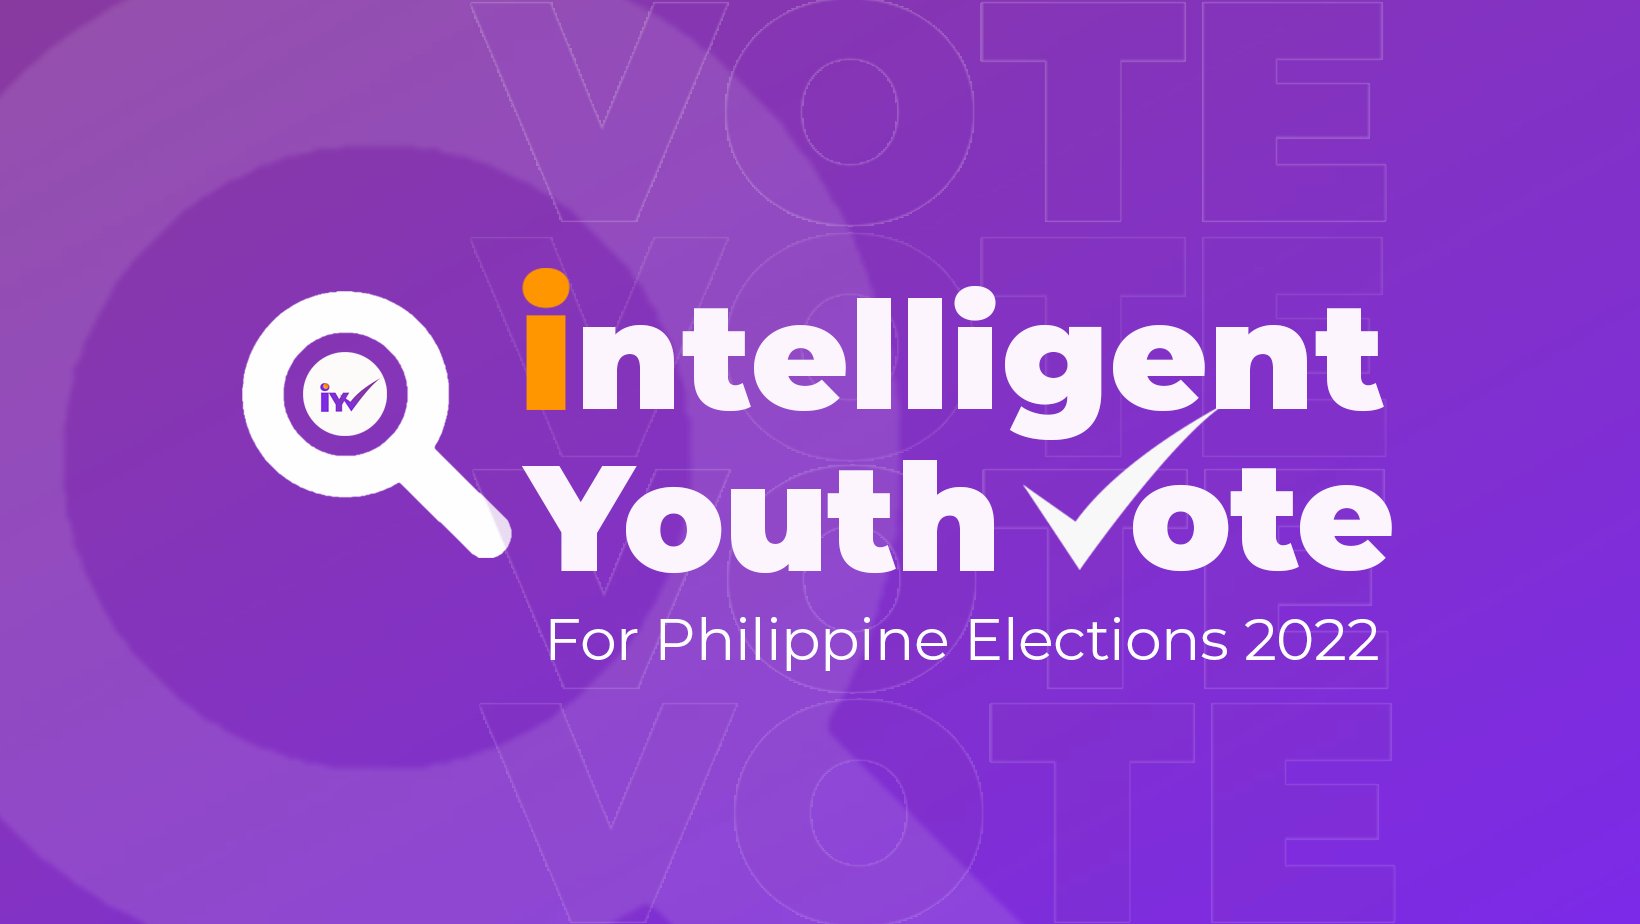 Artlets Batch ‘69 pushes for competency in election project